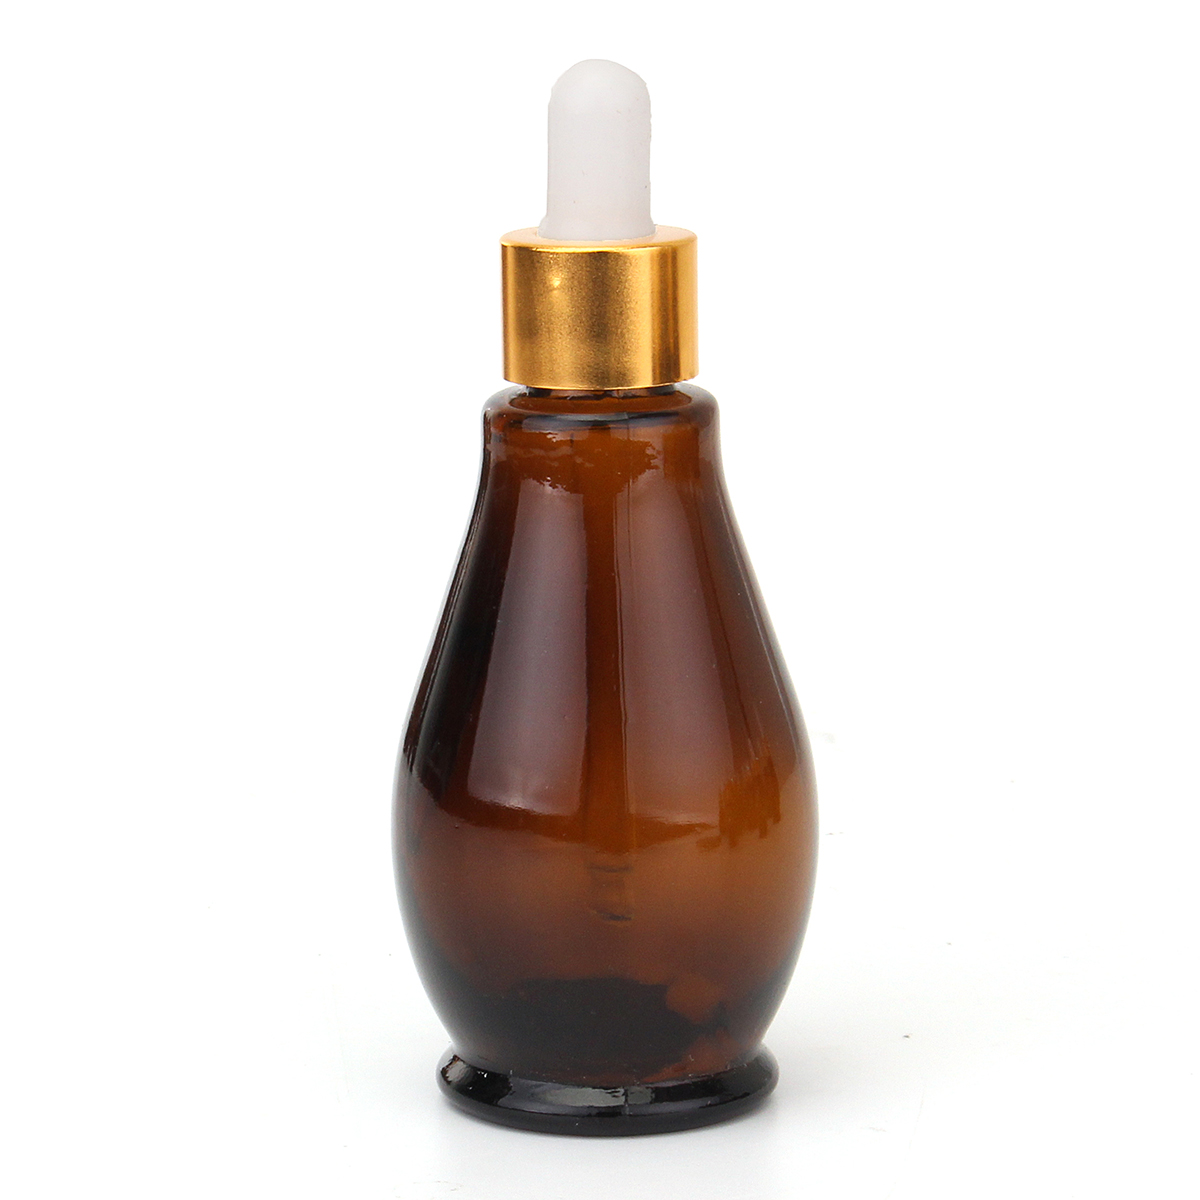 5Pcs-Amber-Glass-Pipette-Eye-Dropper-Bottles-for-Aromatherapy-Essential-Oil-Perfume-Toner-1276237-9